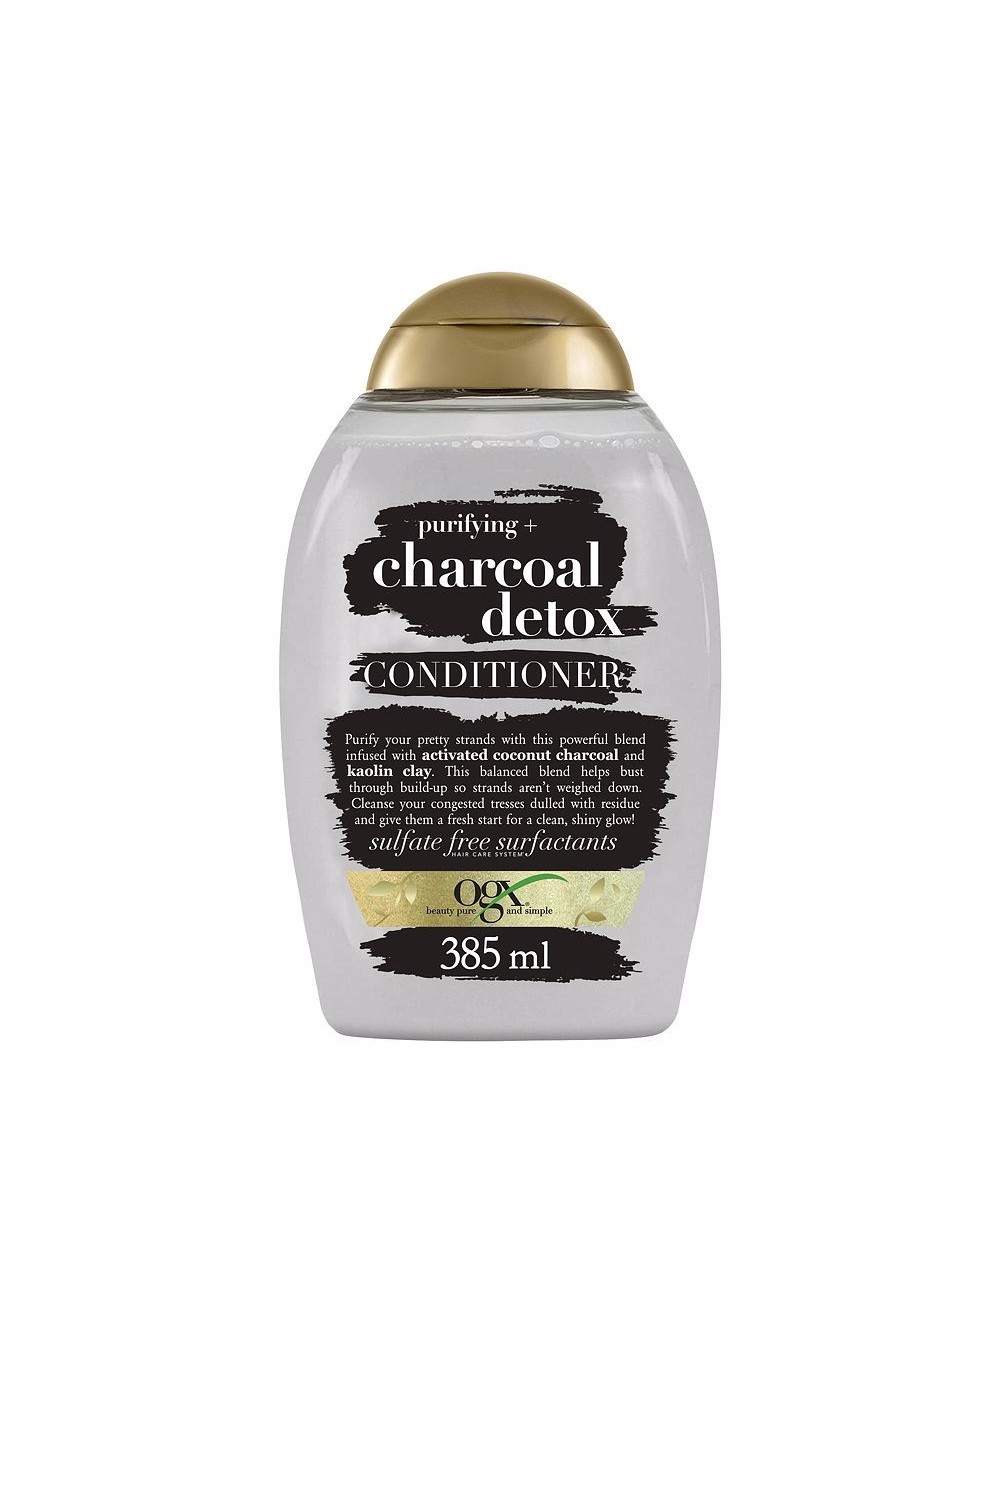 Ogx Charcoal Detox Purifying Hair Conditioner 385ml